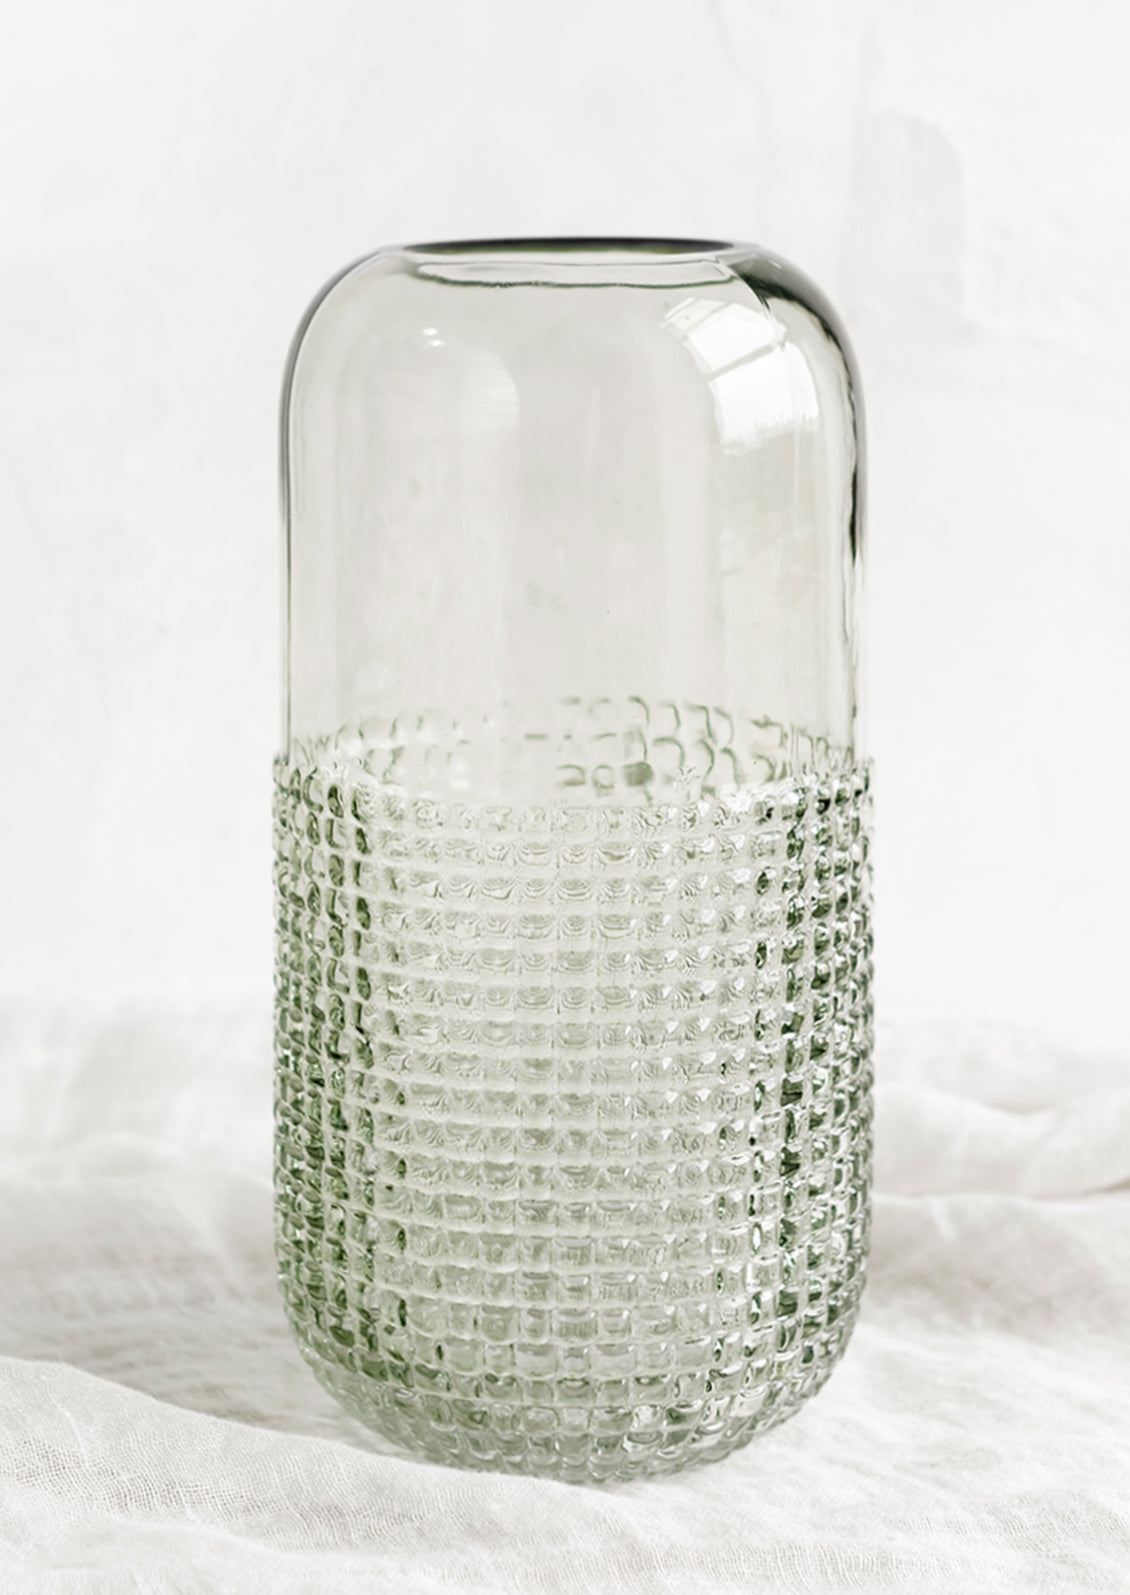 A glass vase with pyramid grid texture on lower half.